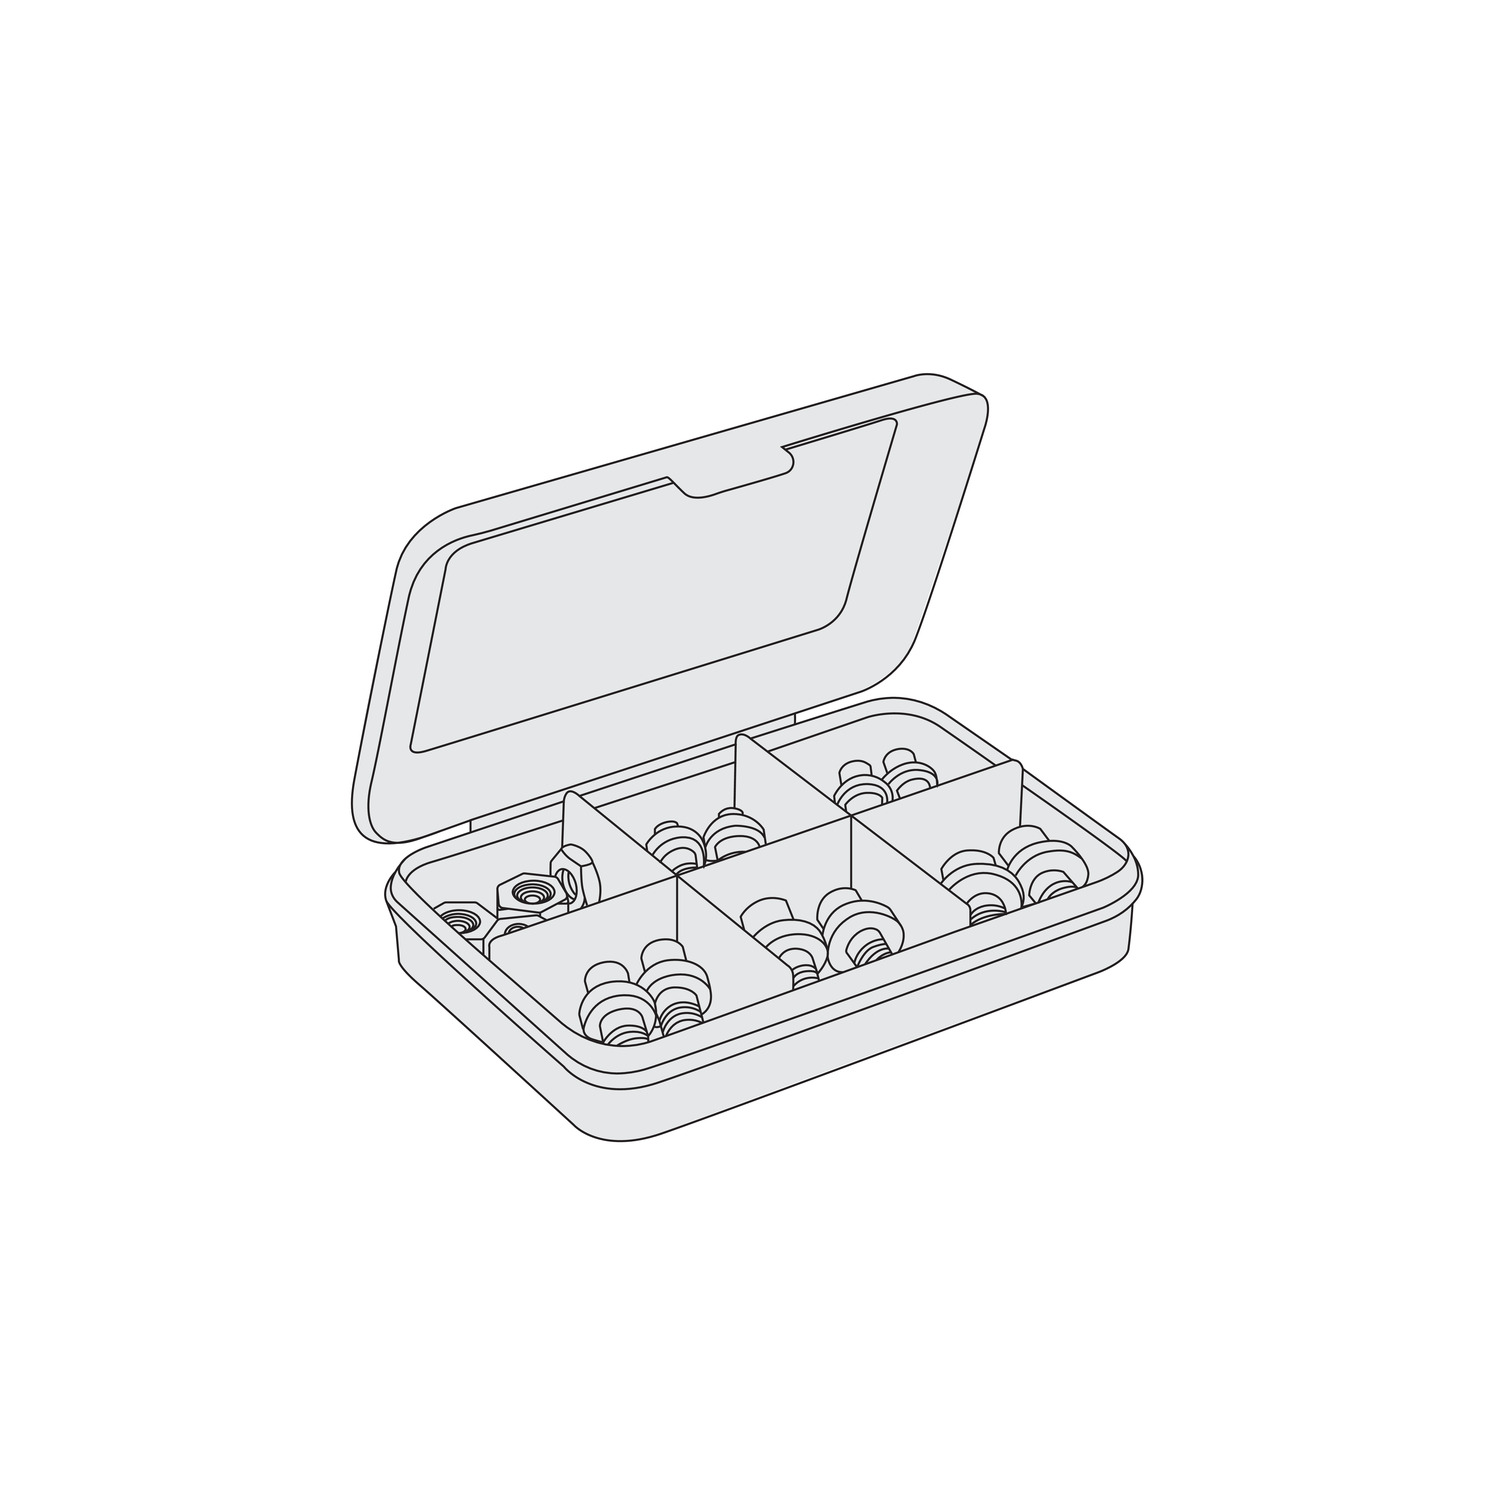 95362 Replaceable Pin - Assortment